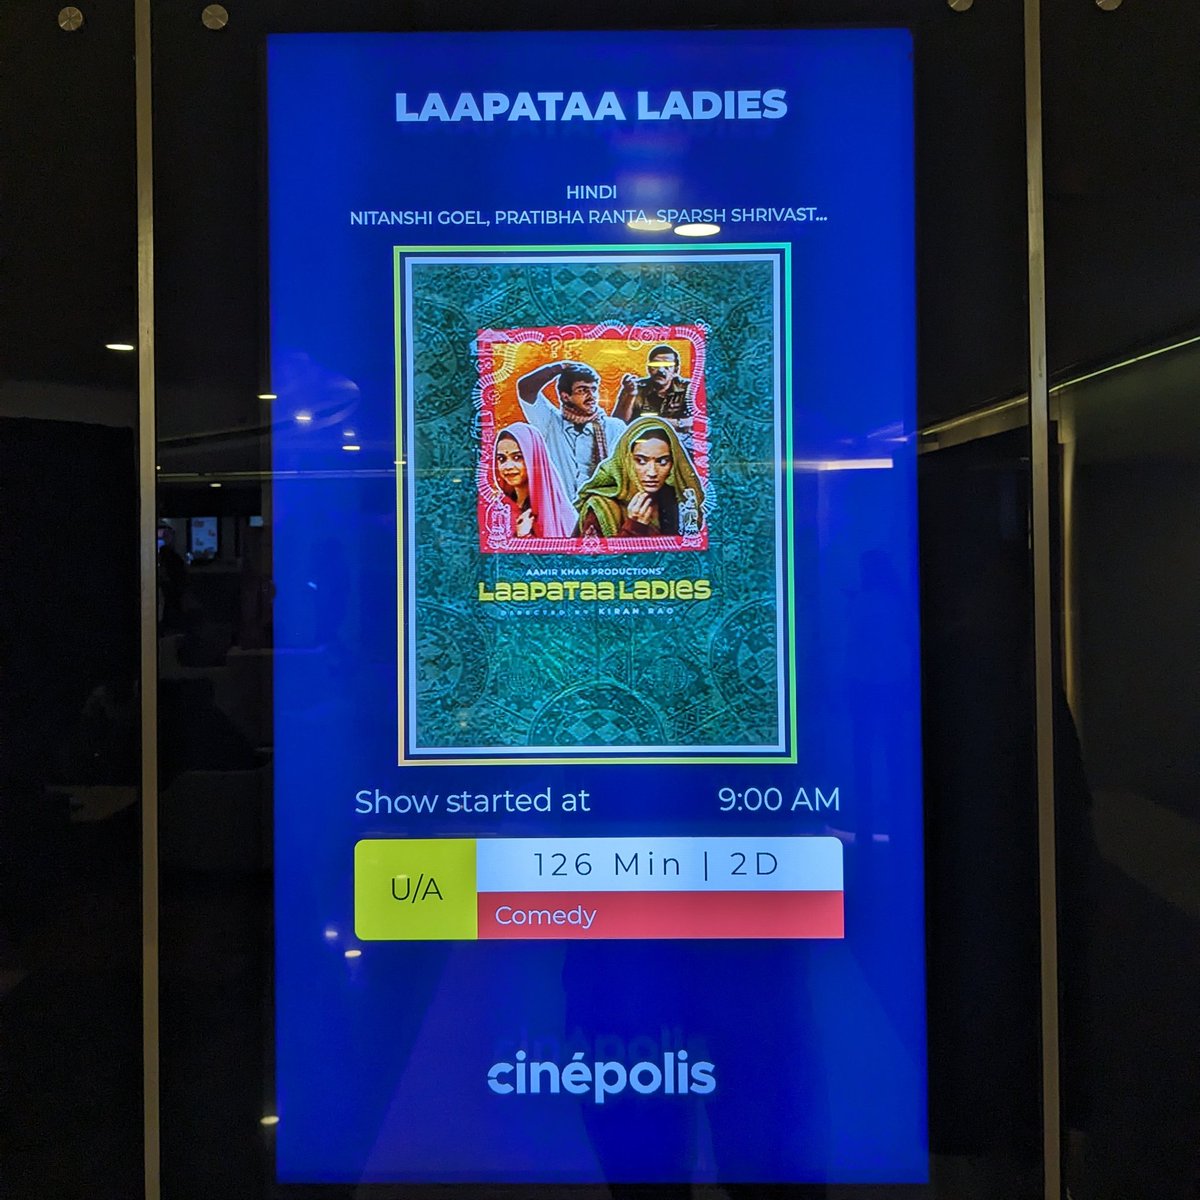 #LaapataaLadies is such a lovely film. I wanted to jump inside that giant screen and just hug every single character by the end. Bohot hi pyaari movie ekdum ❤️